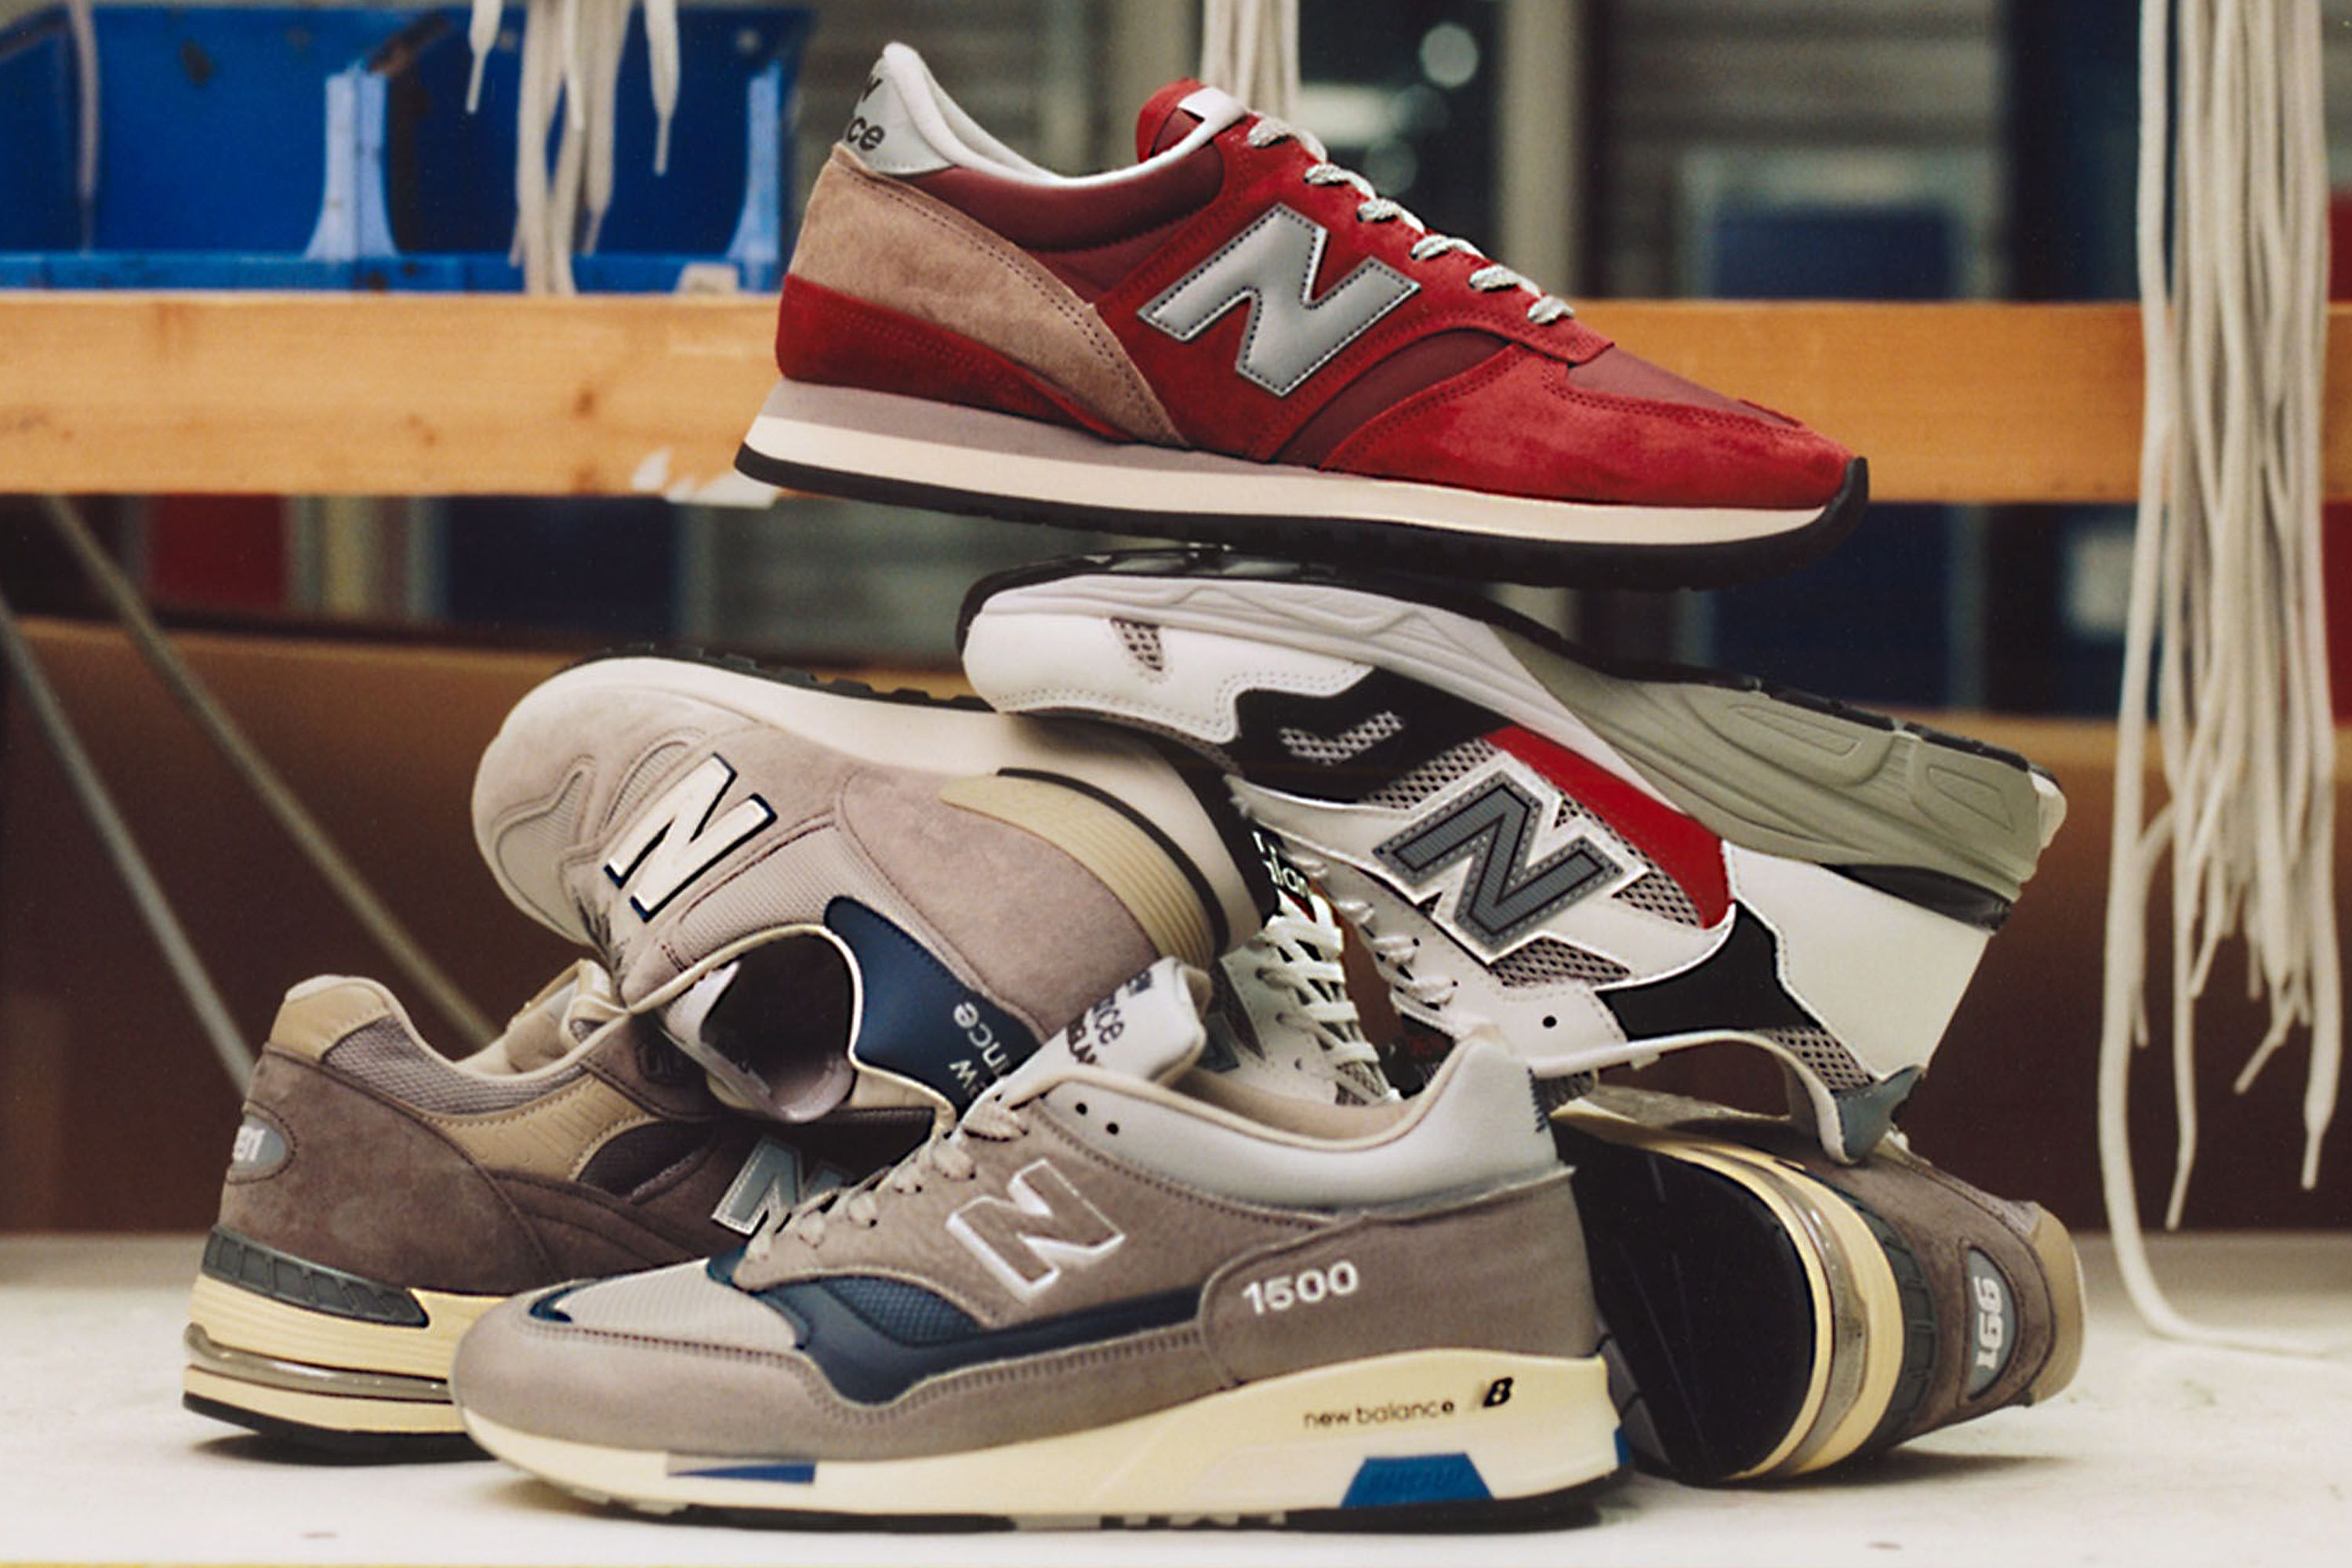 The Complete Guide to New Balance All Styles,